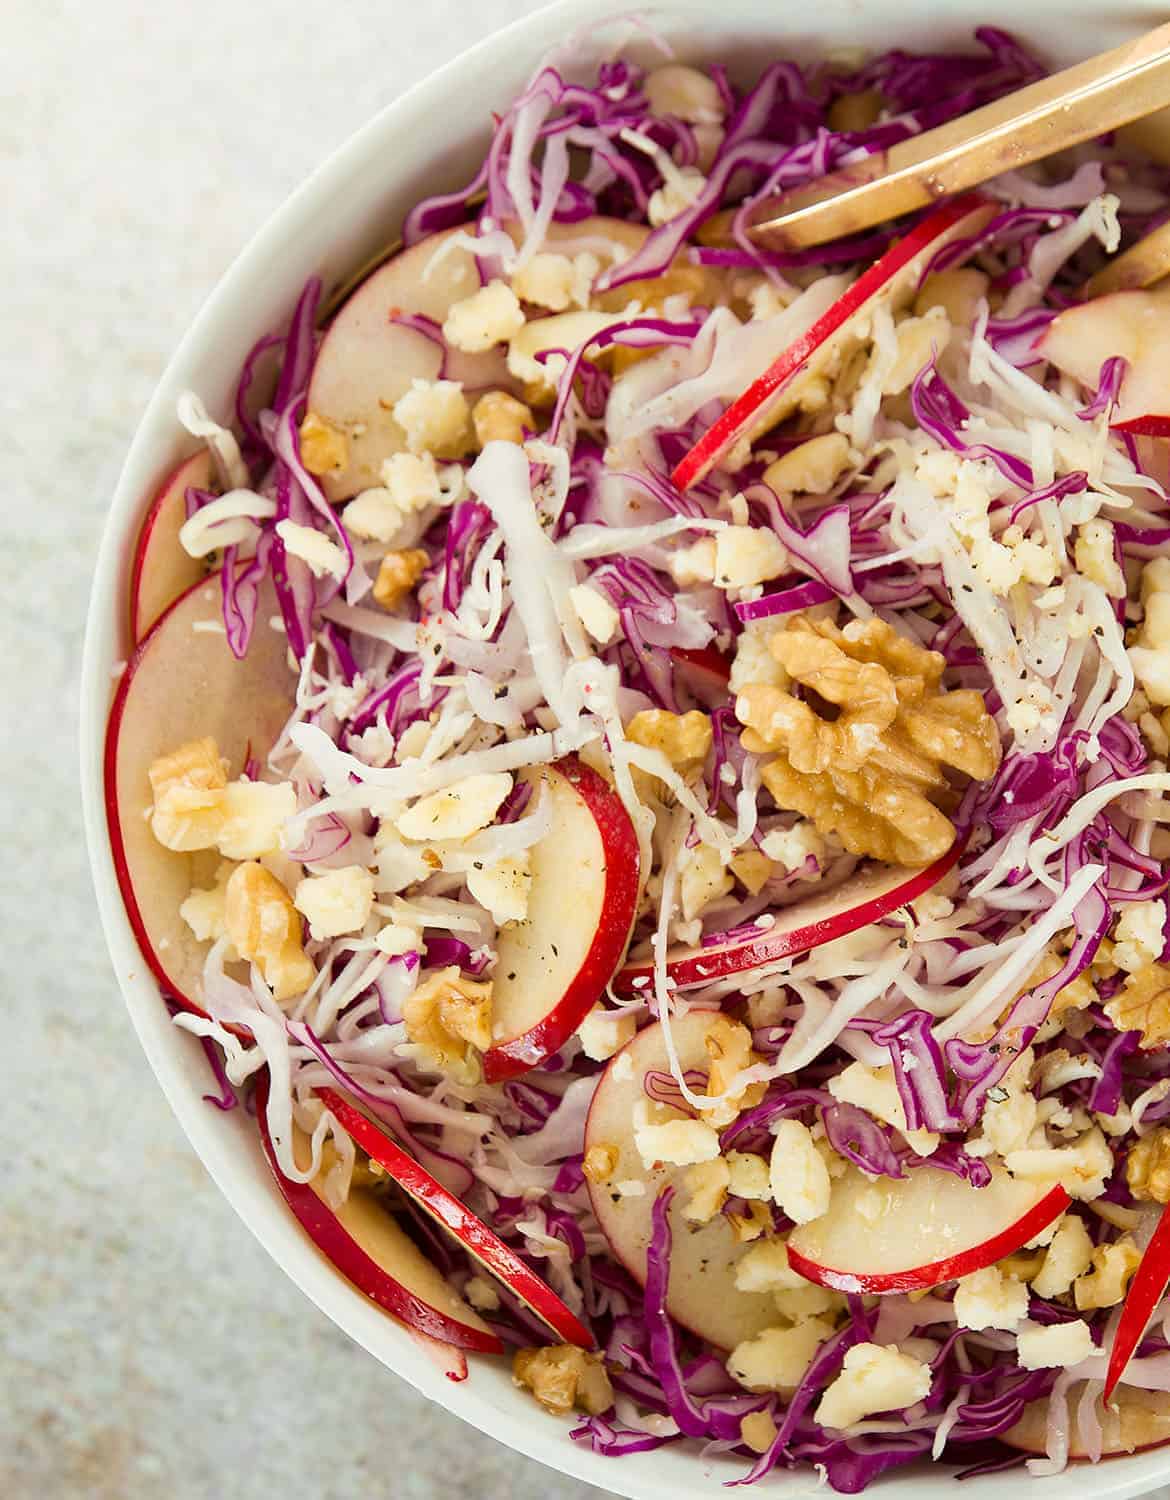 Cabbage Salad with Apples and Walnuts